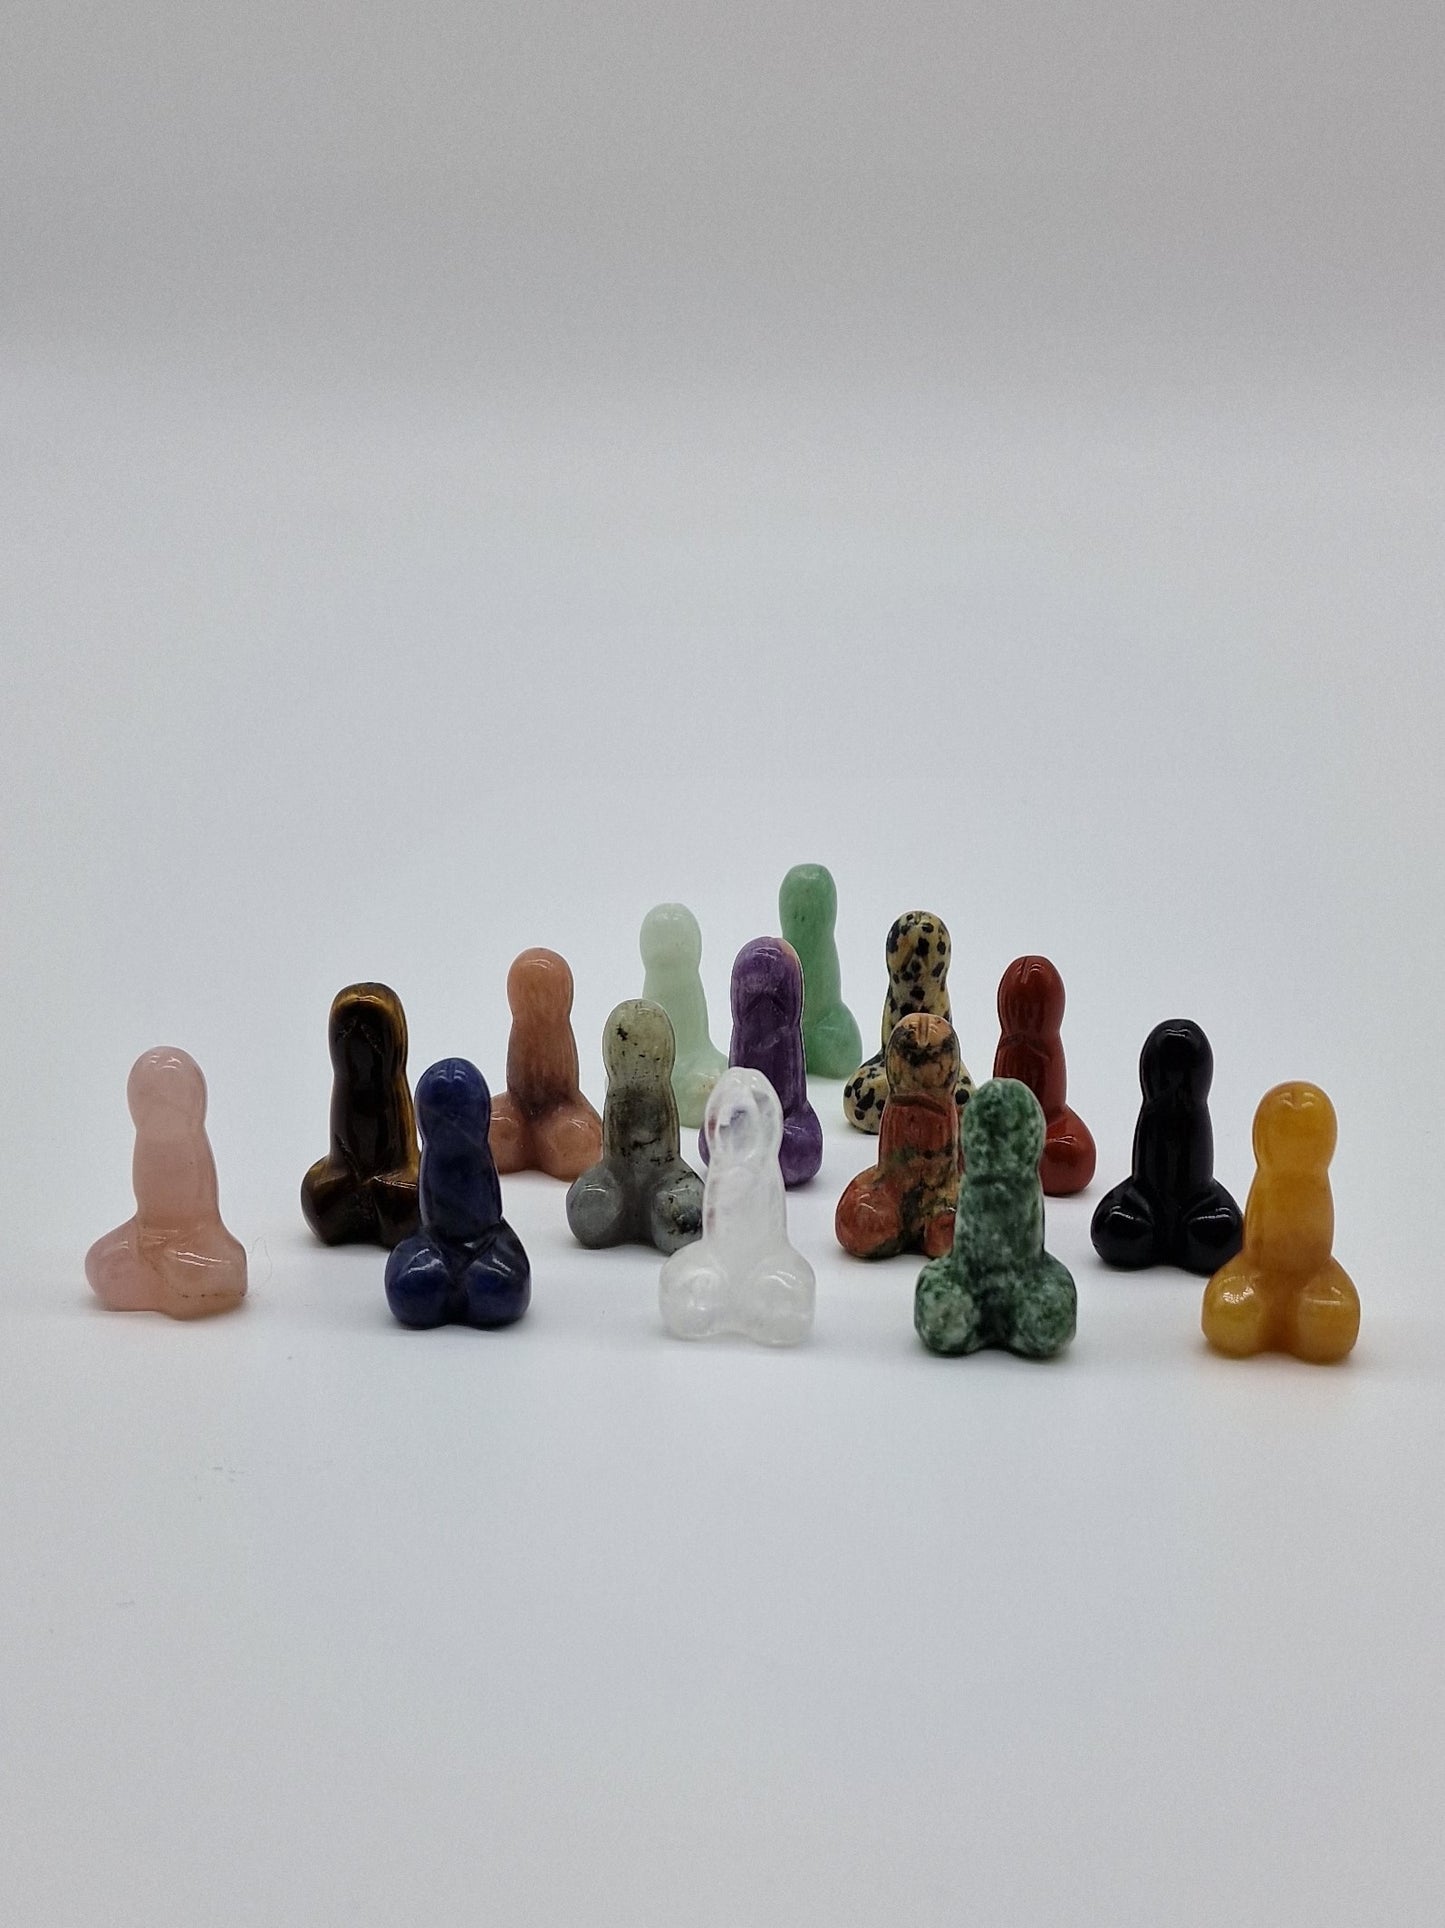 Crystal dicks or penis - 15 mixed stones for the price of 10. Plus a velvet bag, a bag of dicks